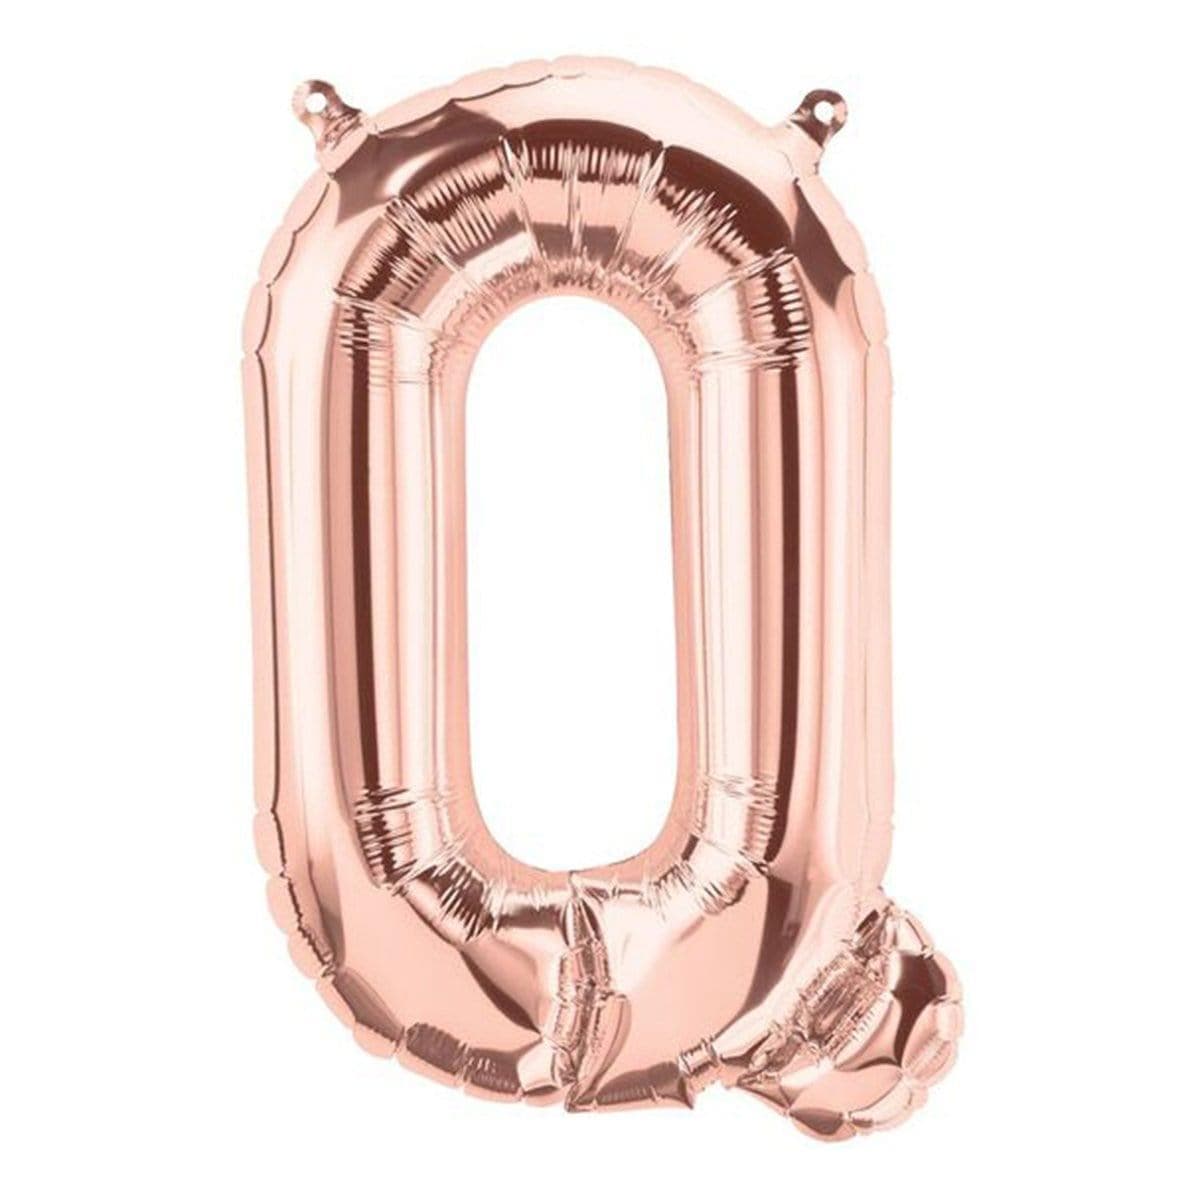 Buy Balloons Rose Gold Letter Q Foil Balloon, 16 Inches sold at Party Expert